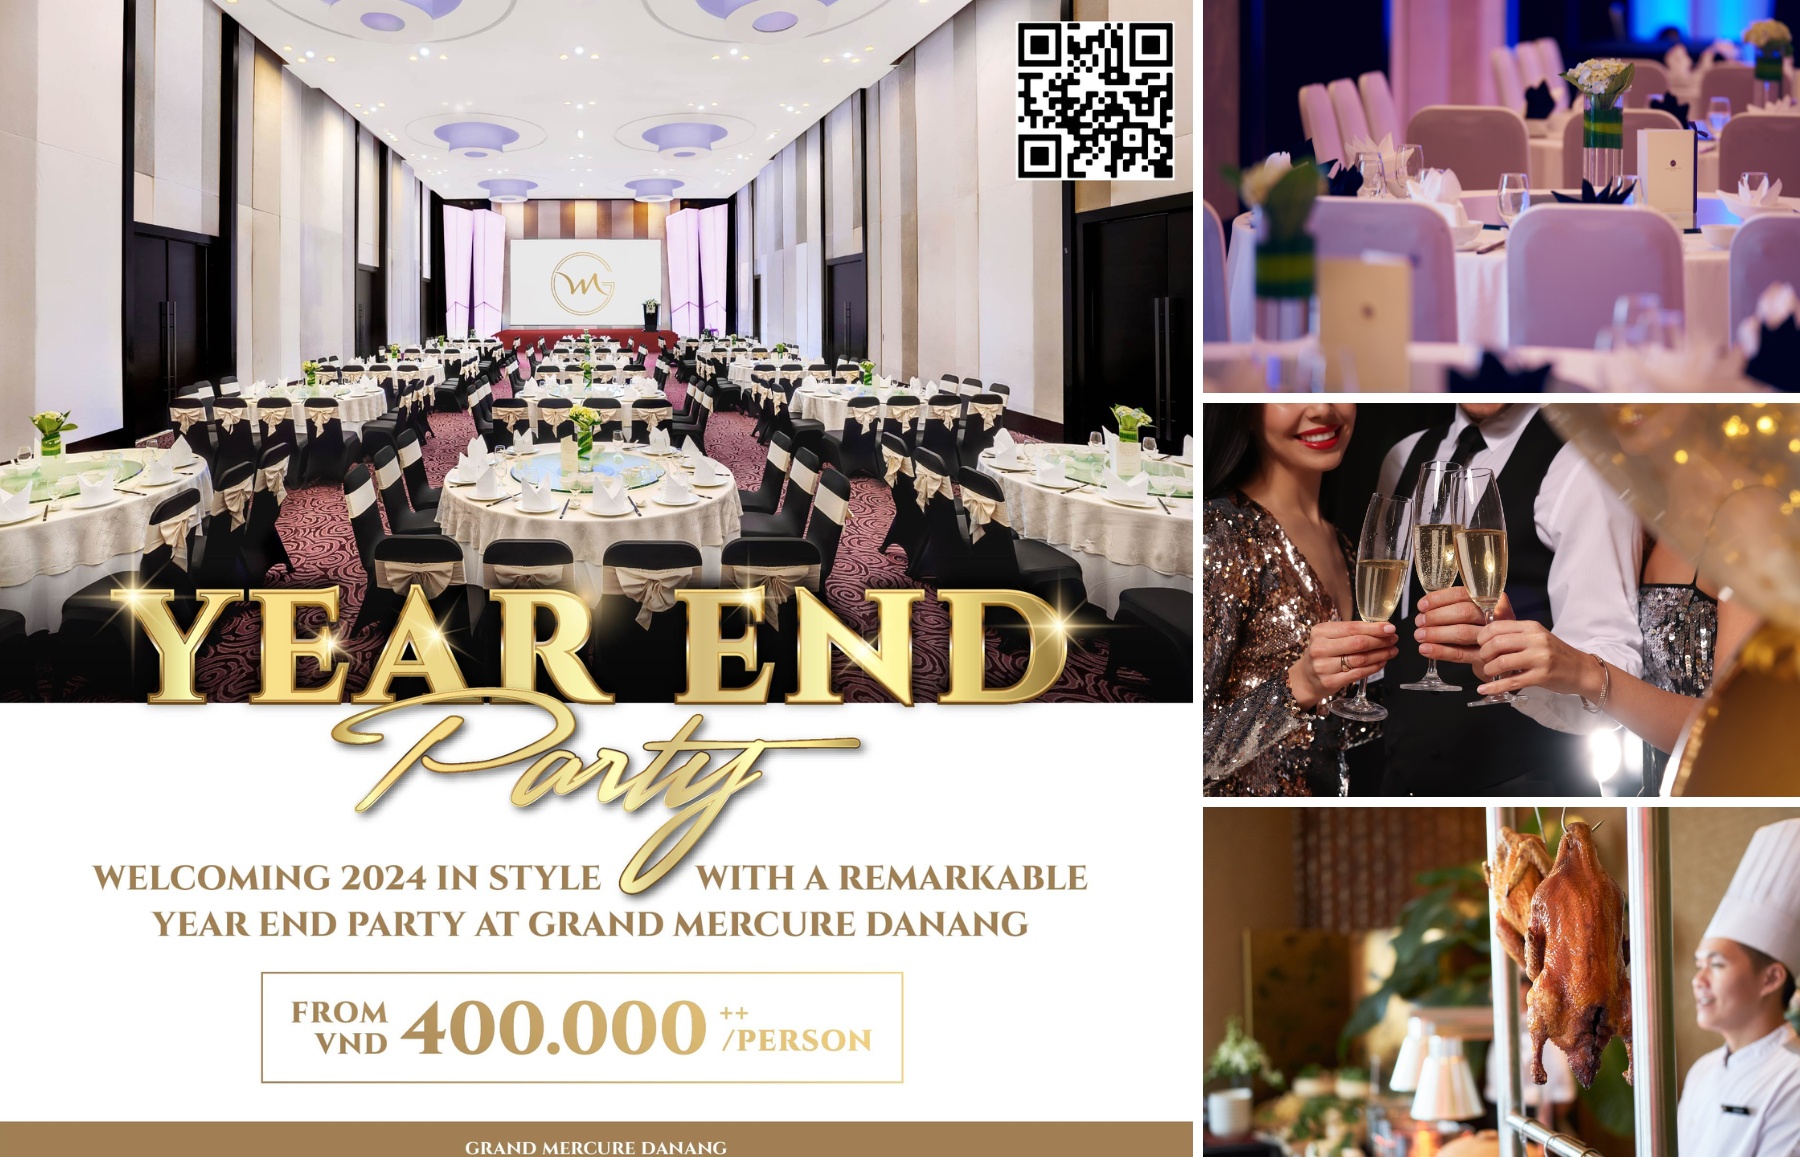 All-inclusive 'Year-End Party Packages' at Grand Mercure Danang